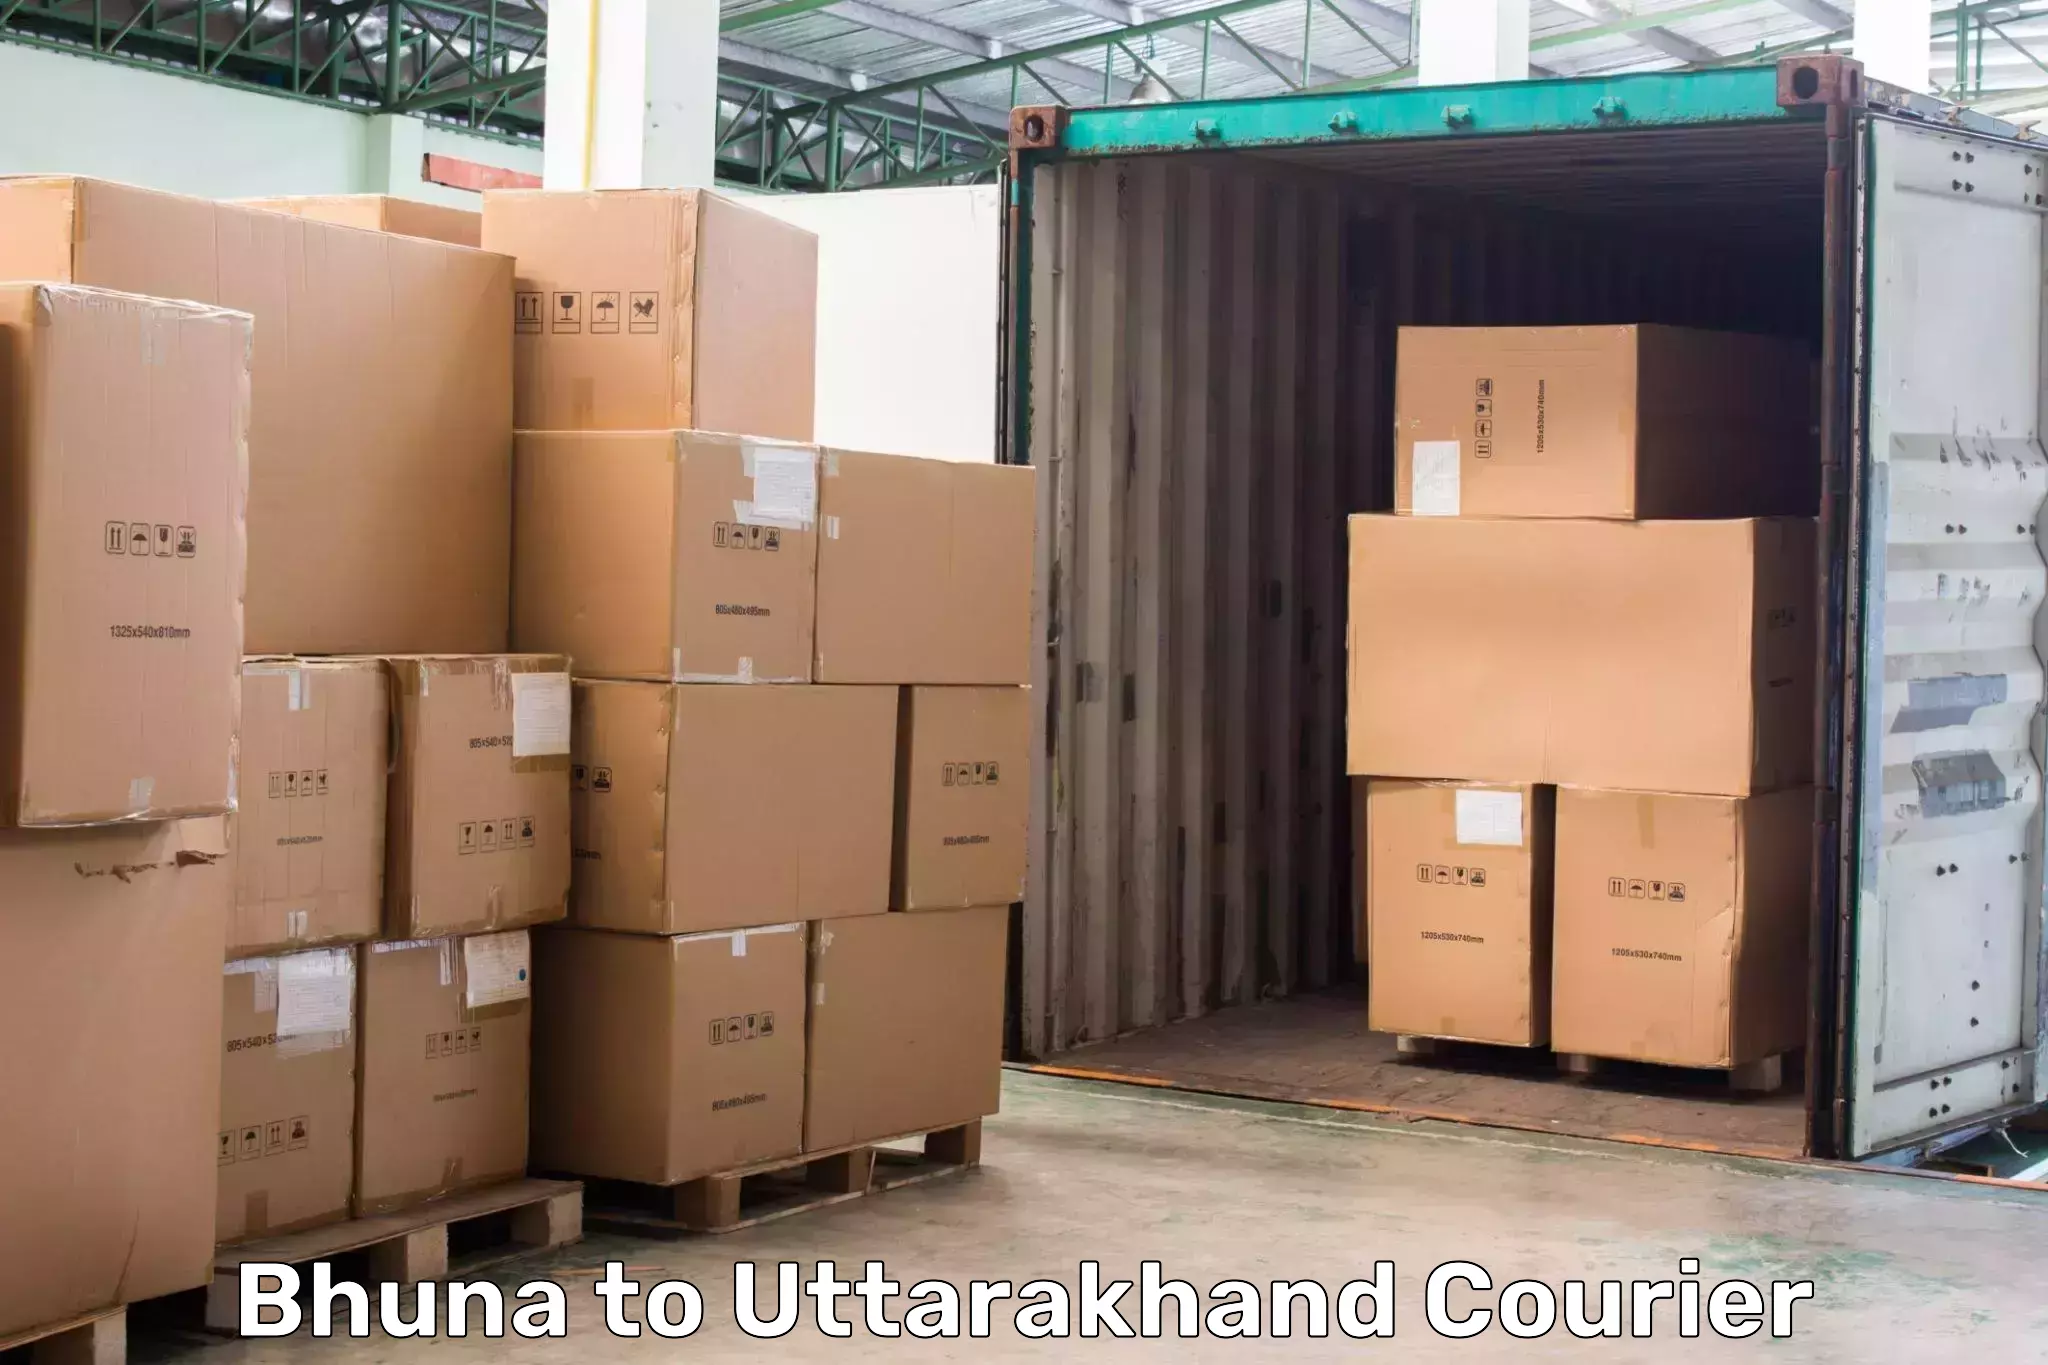 Global shipping solutions Bhuna to Bhagwanpur